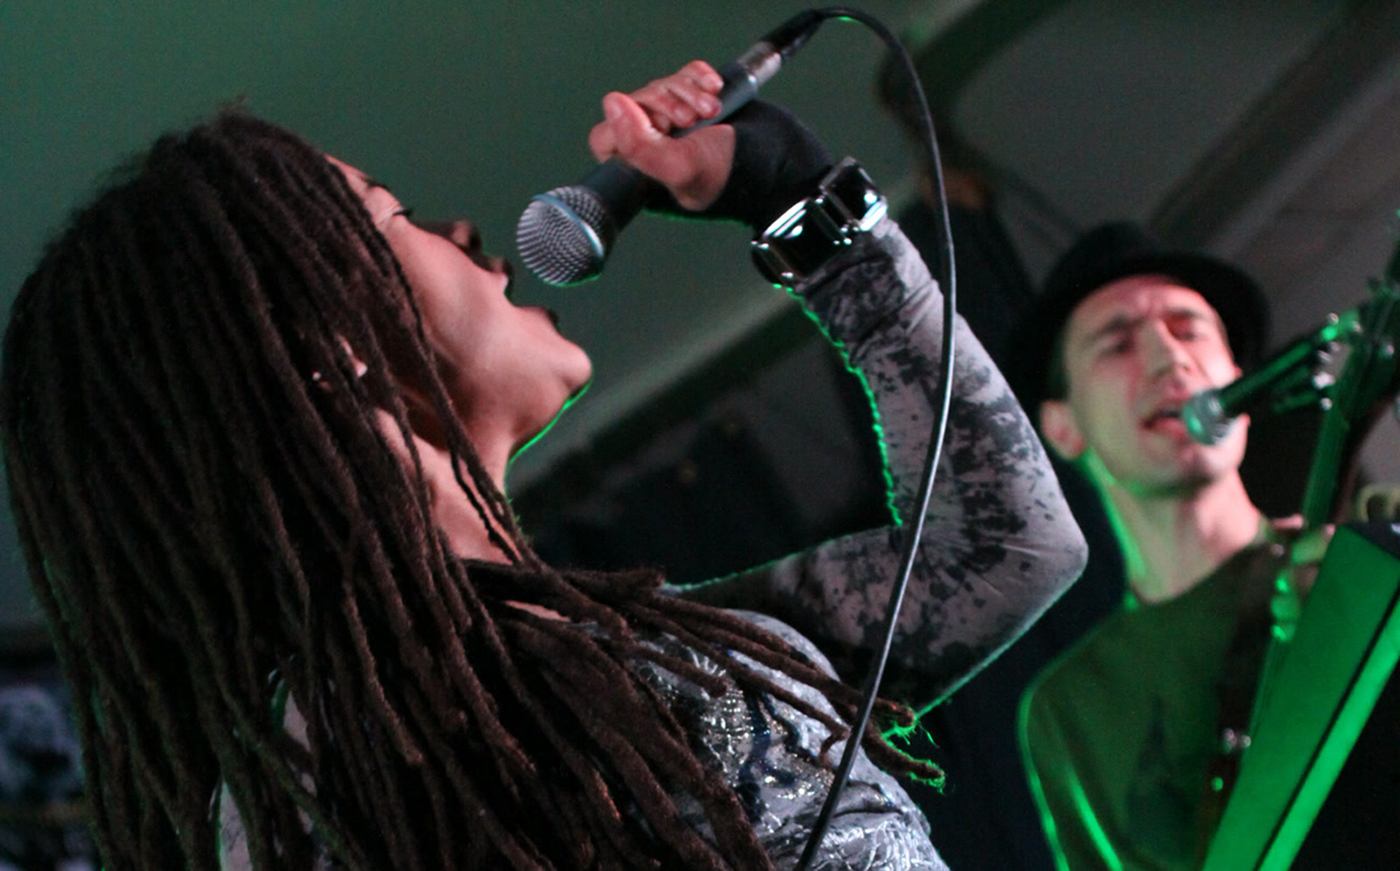 REGGAE MAGIC - Acclaimed band Souljah Fyah perform at the Elks Lodge on March 11th.